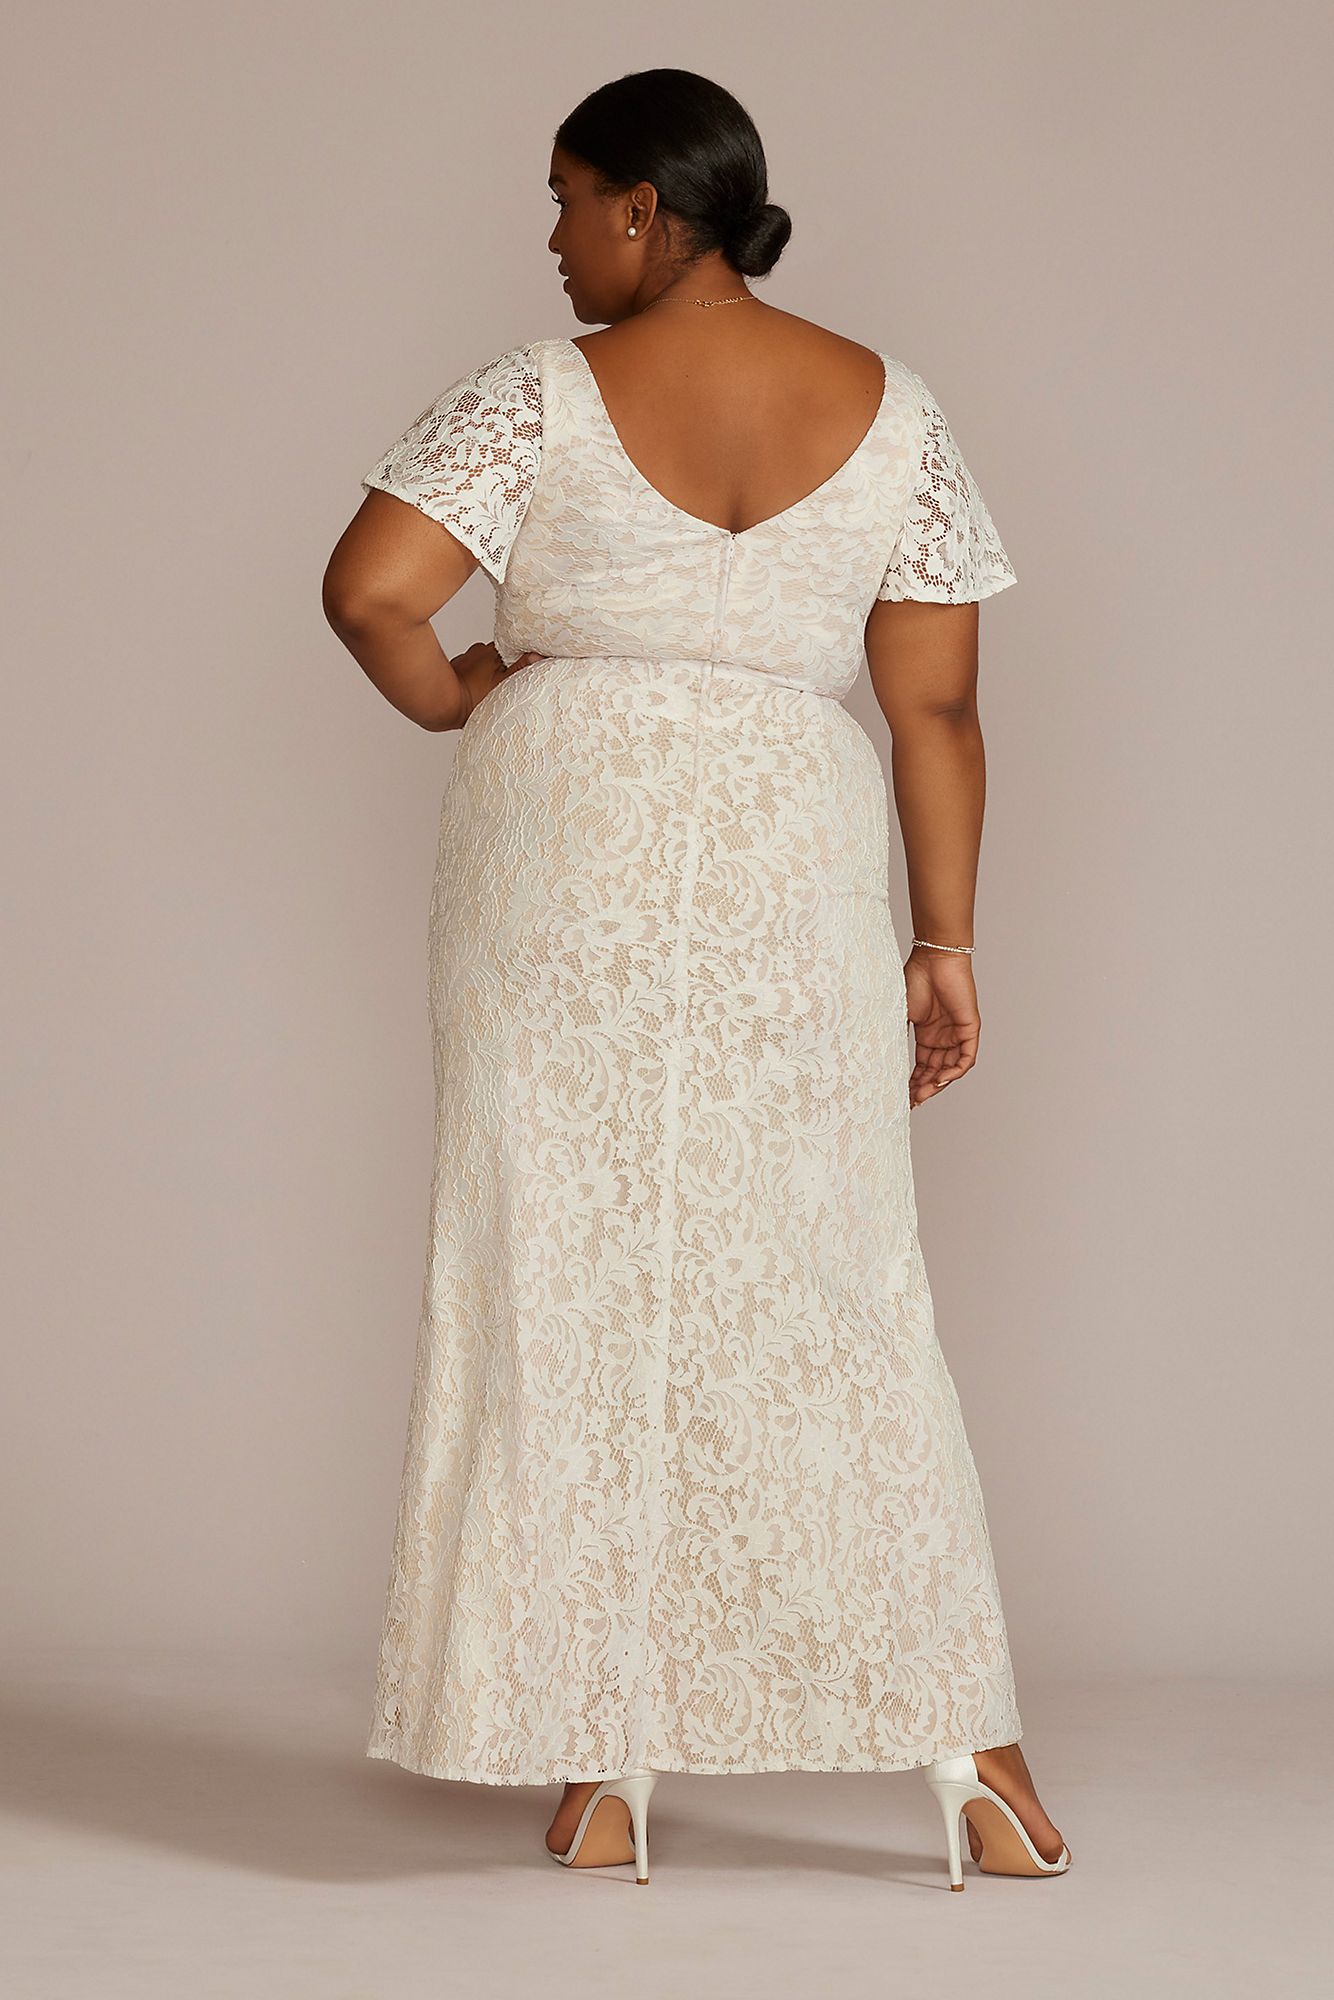 Lace Flutter Sleeve Draped Plus Size Wedding Gown DB Studio 9SDWG1054